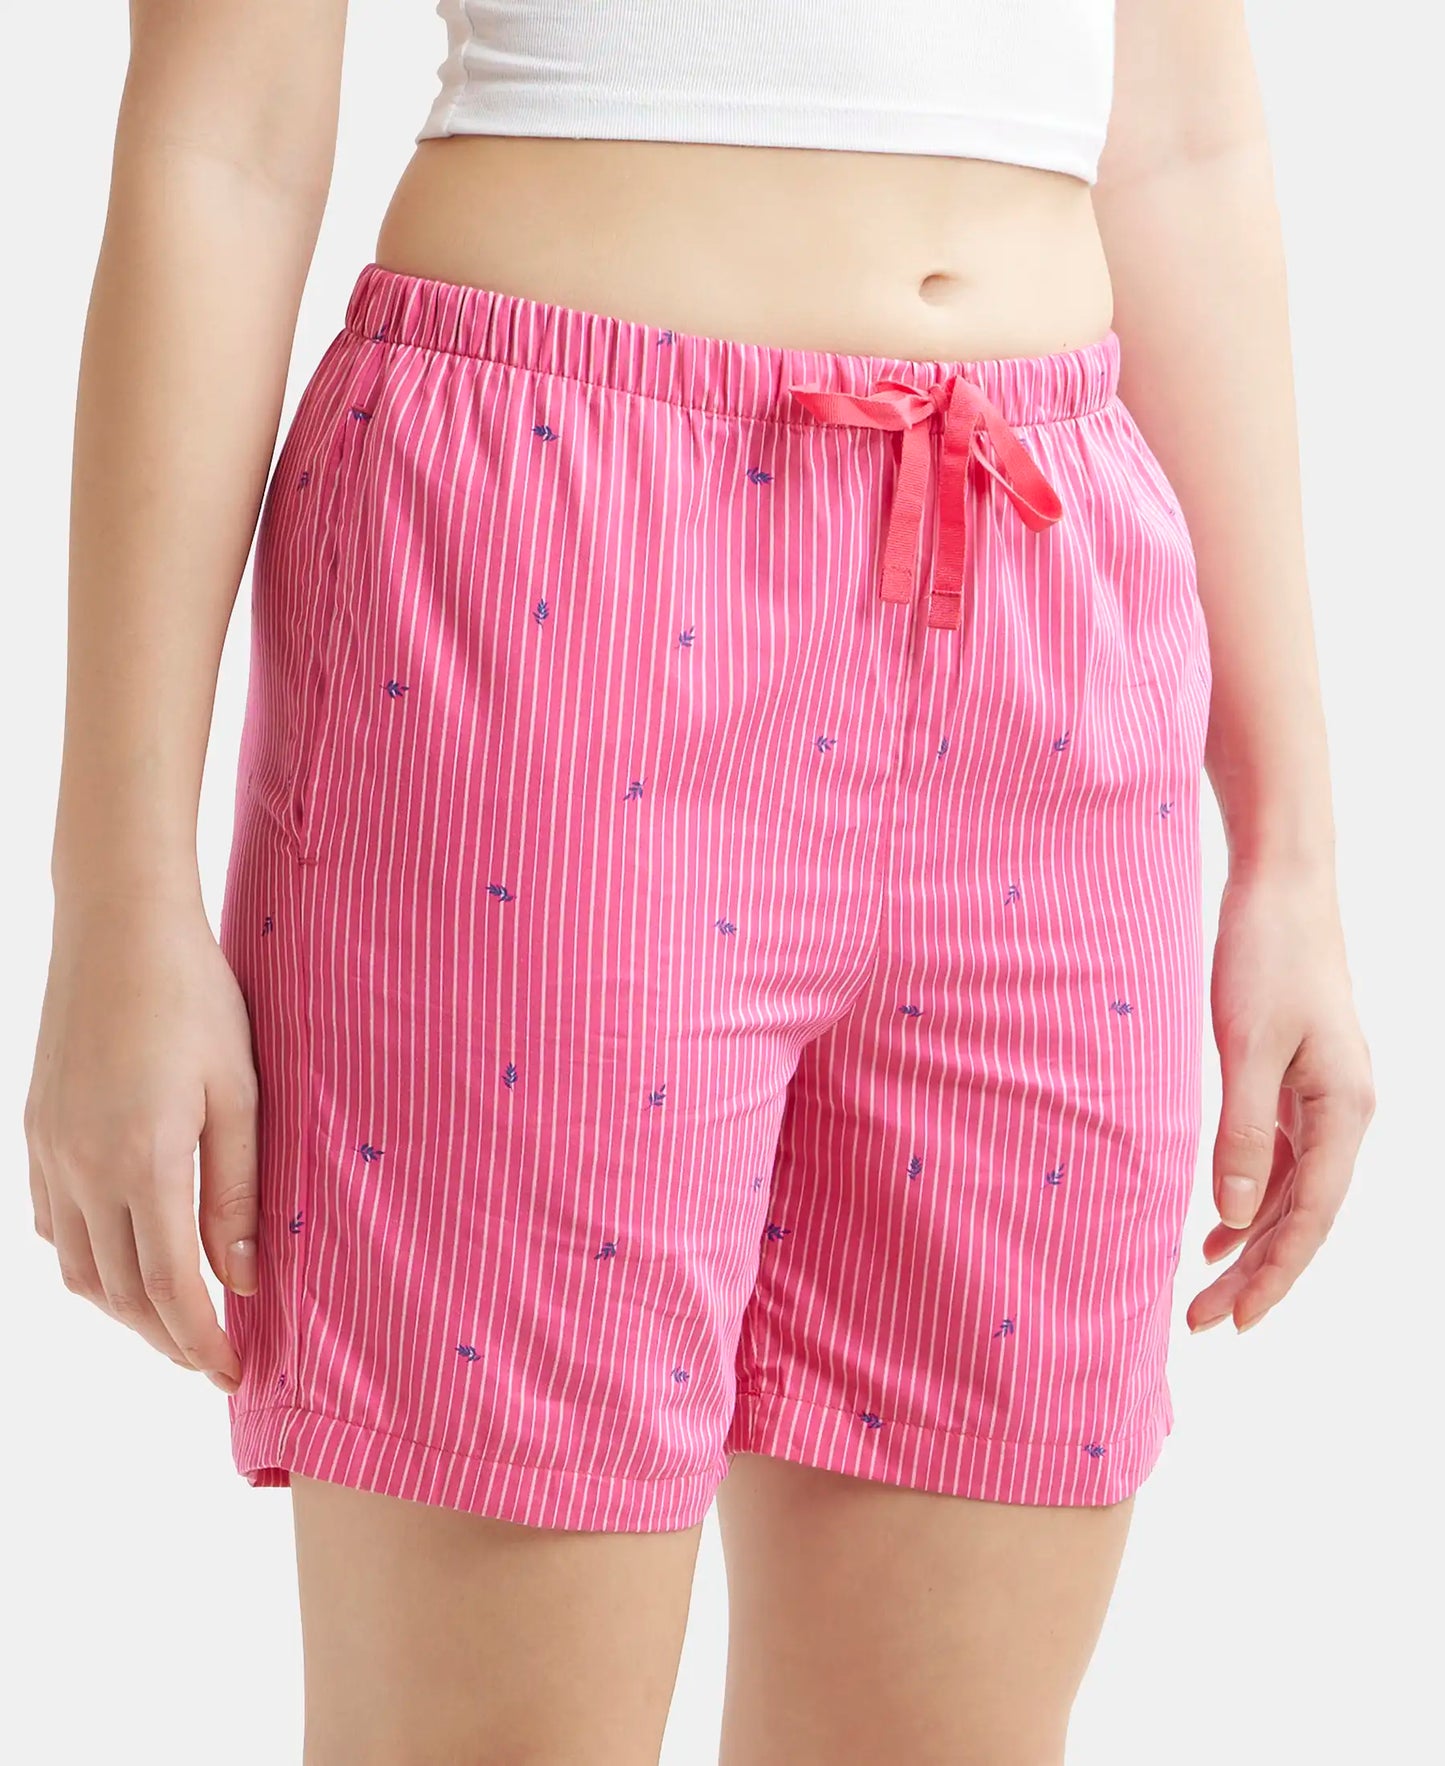 Super Combed Cotton Yarn Dyed Woven Relaxed Fit Striped Shorts with Side Pockets - Ruby Assorted Checks-2